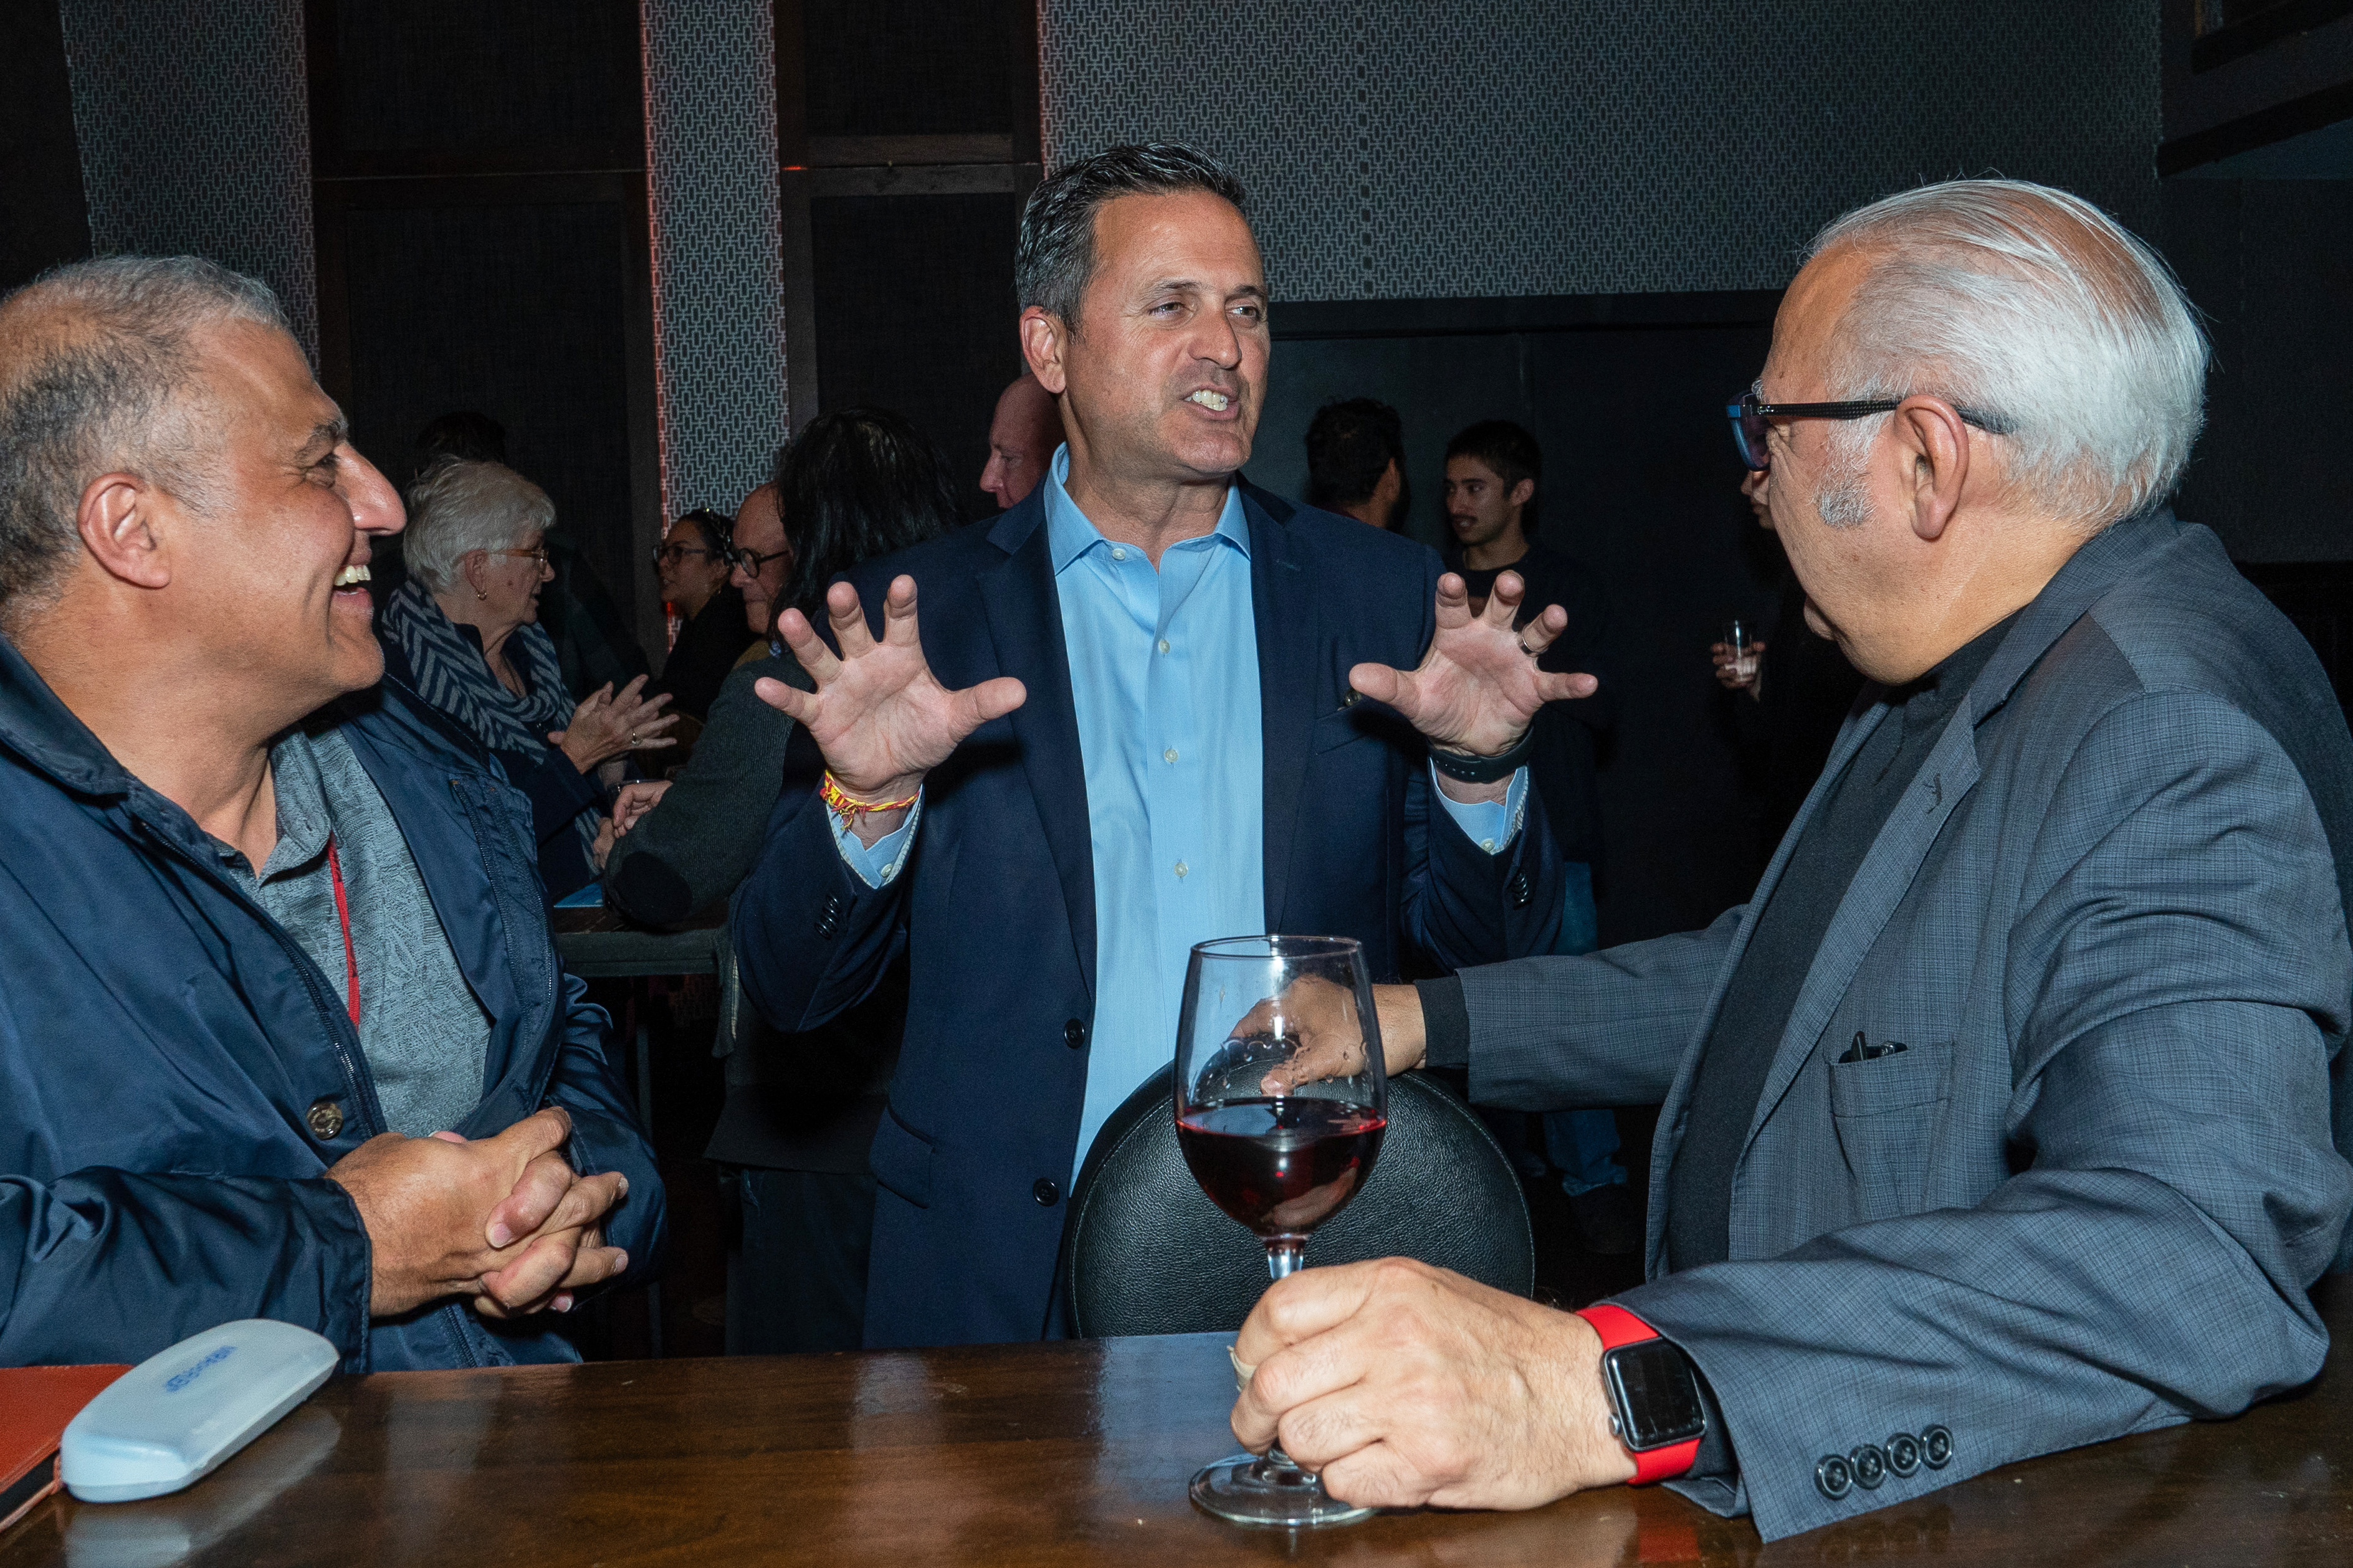 Three men share a conversation at a social event, one gesturing animatedly while holding a wine glass. They are dressed in business casual attire.